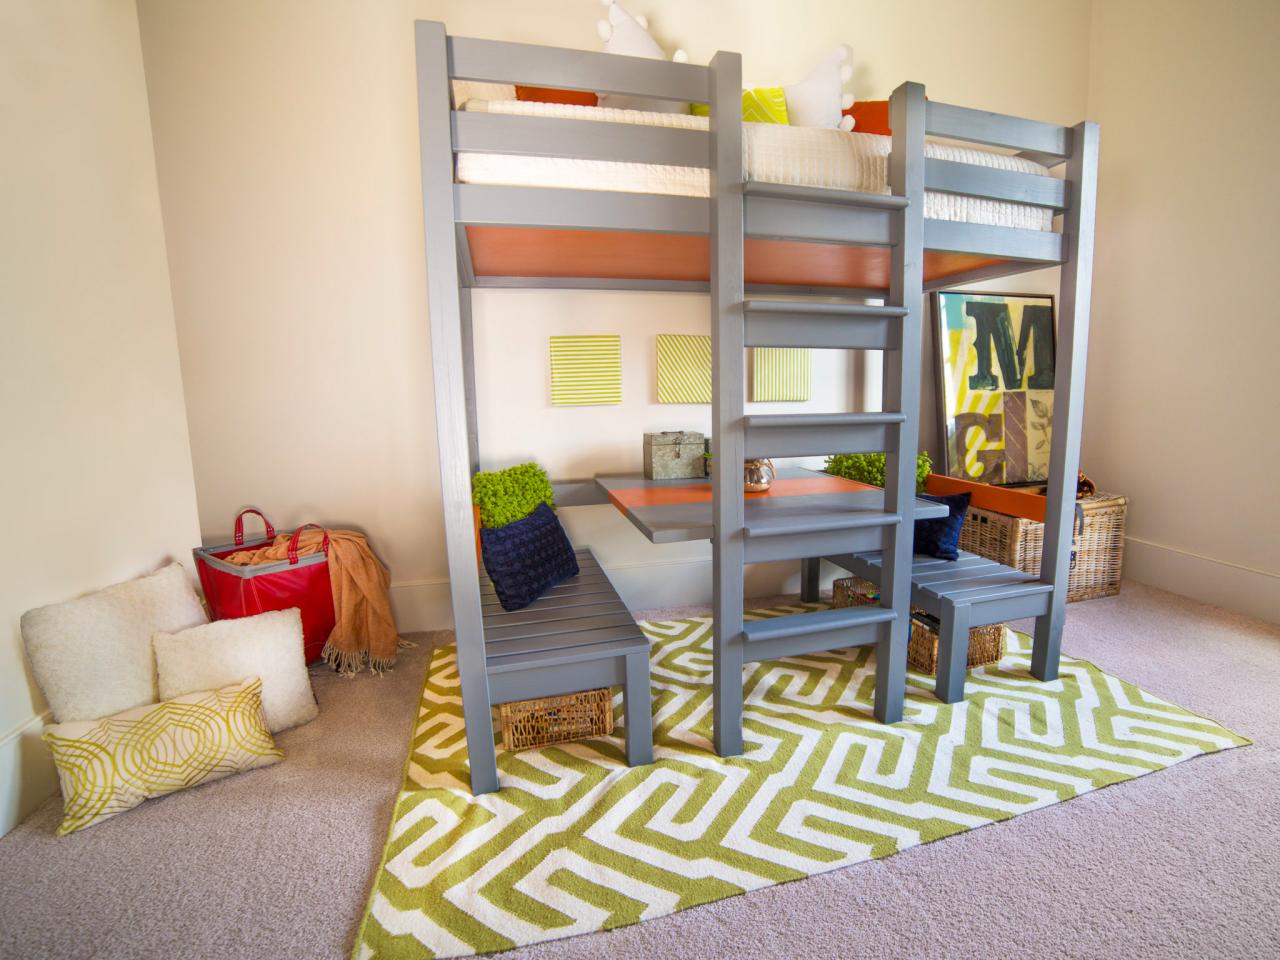 How To Build A Loft Bed With Built In, Making A Bunk Bed Into A Loft Bed